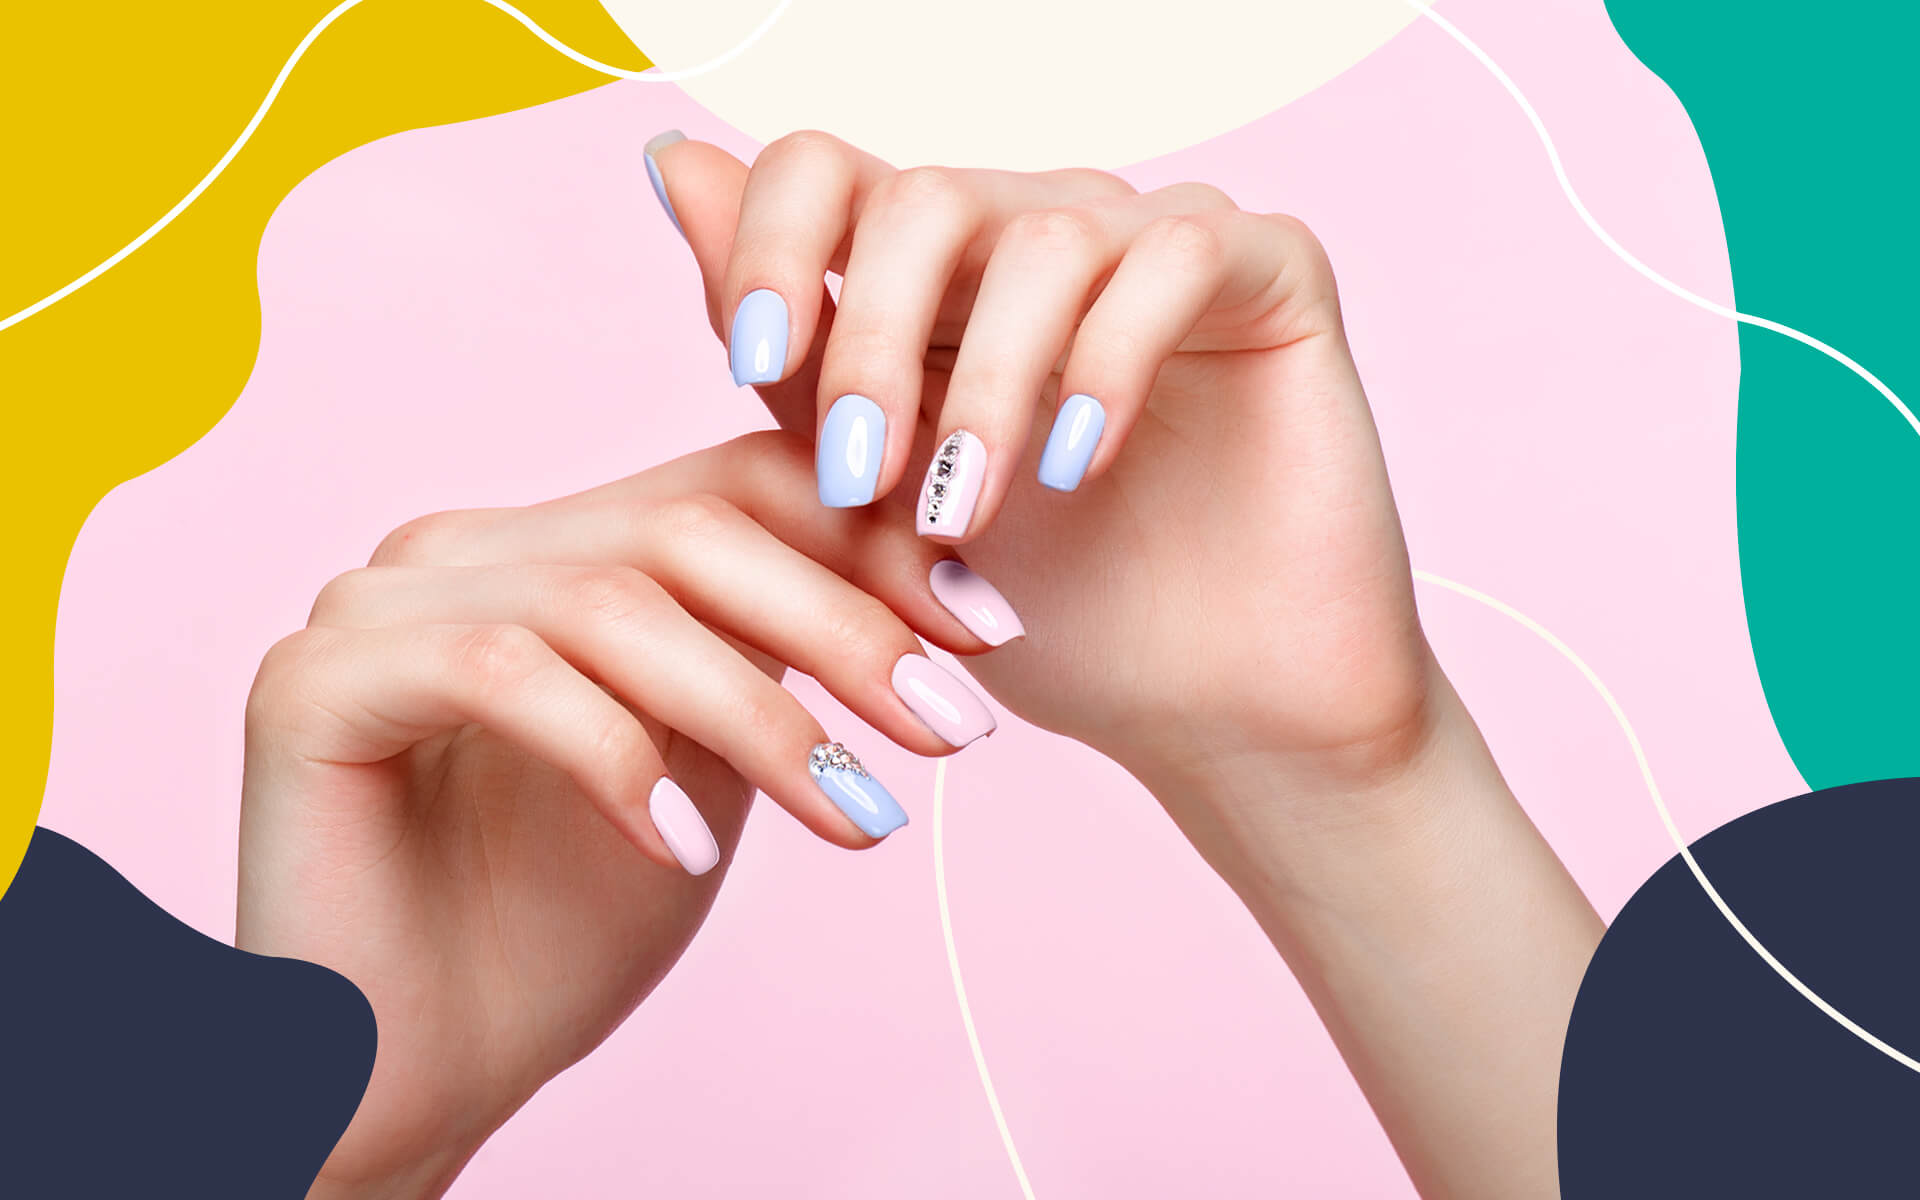 6 Essential Vitamins for Healthy Nails